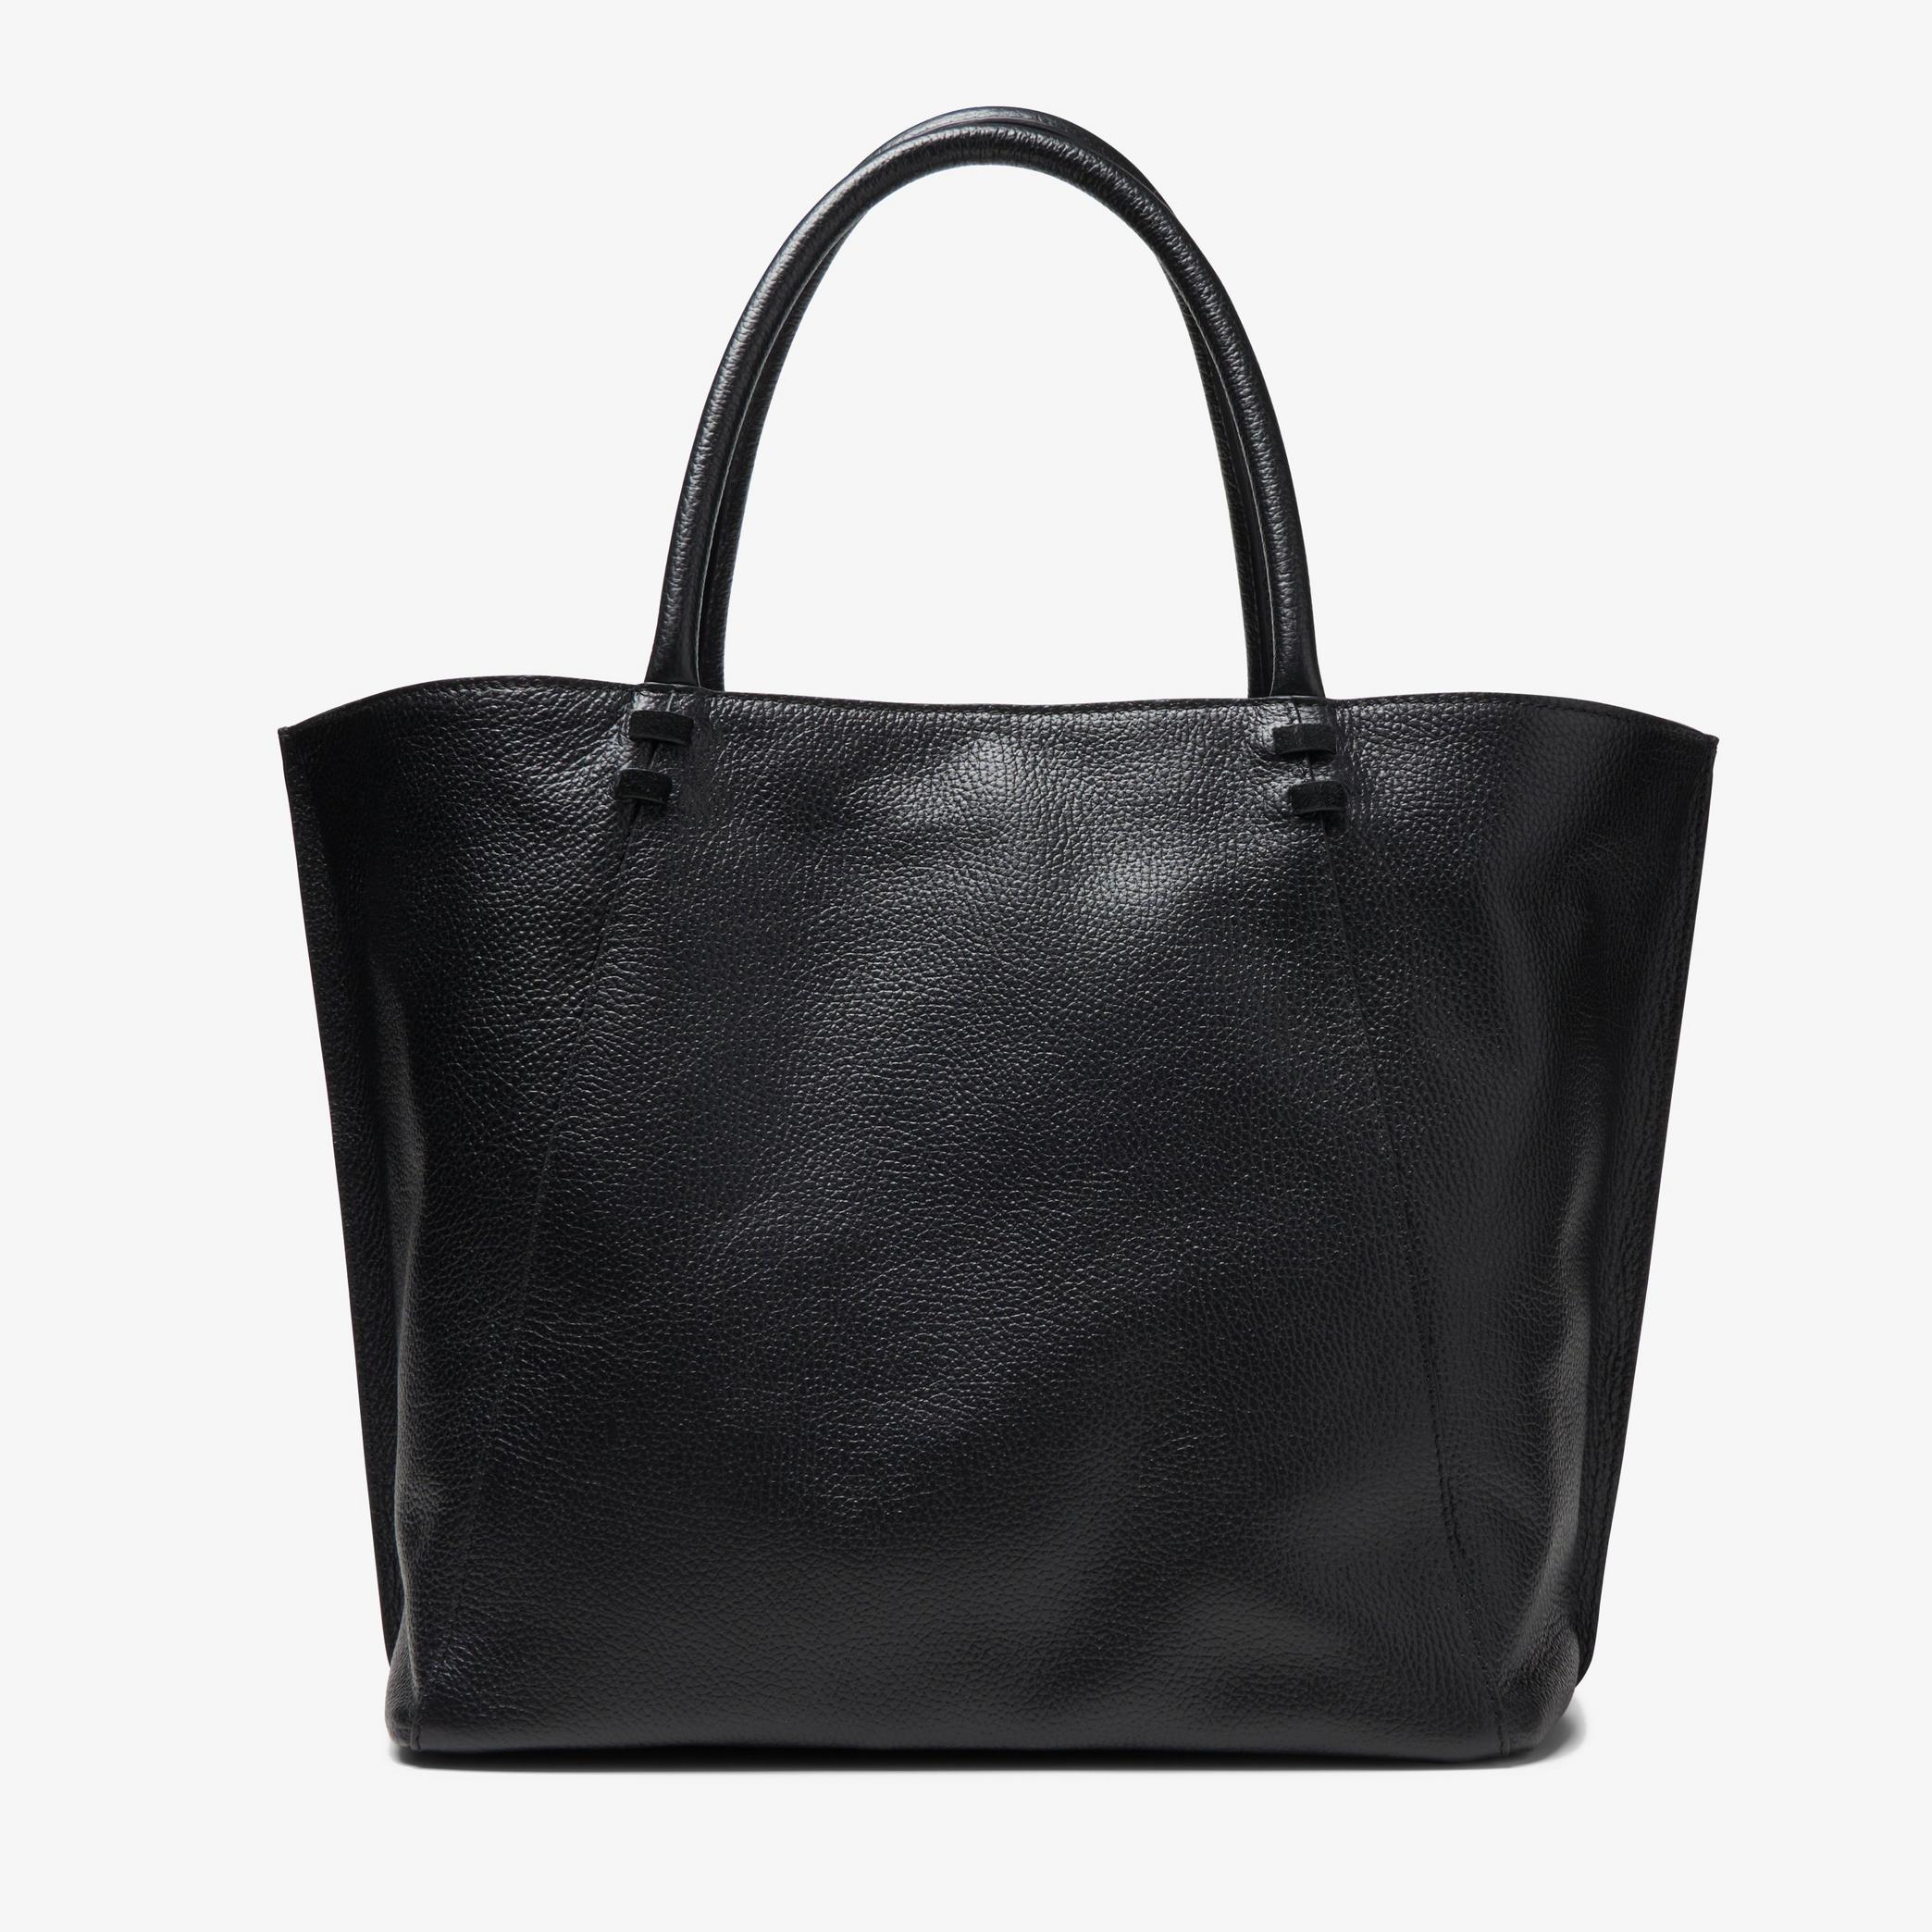 Womens Casual Large Black Leather Tote Bag | Clarks UK